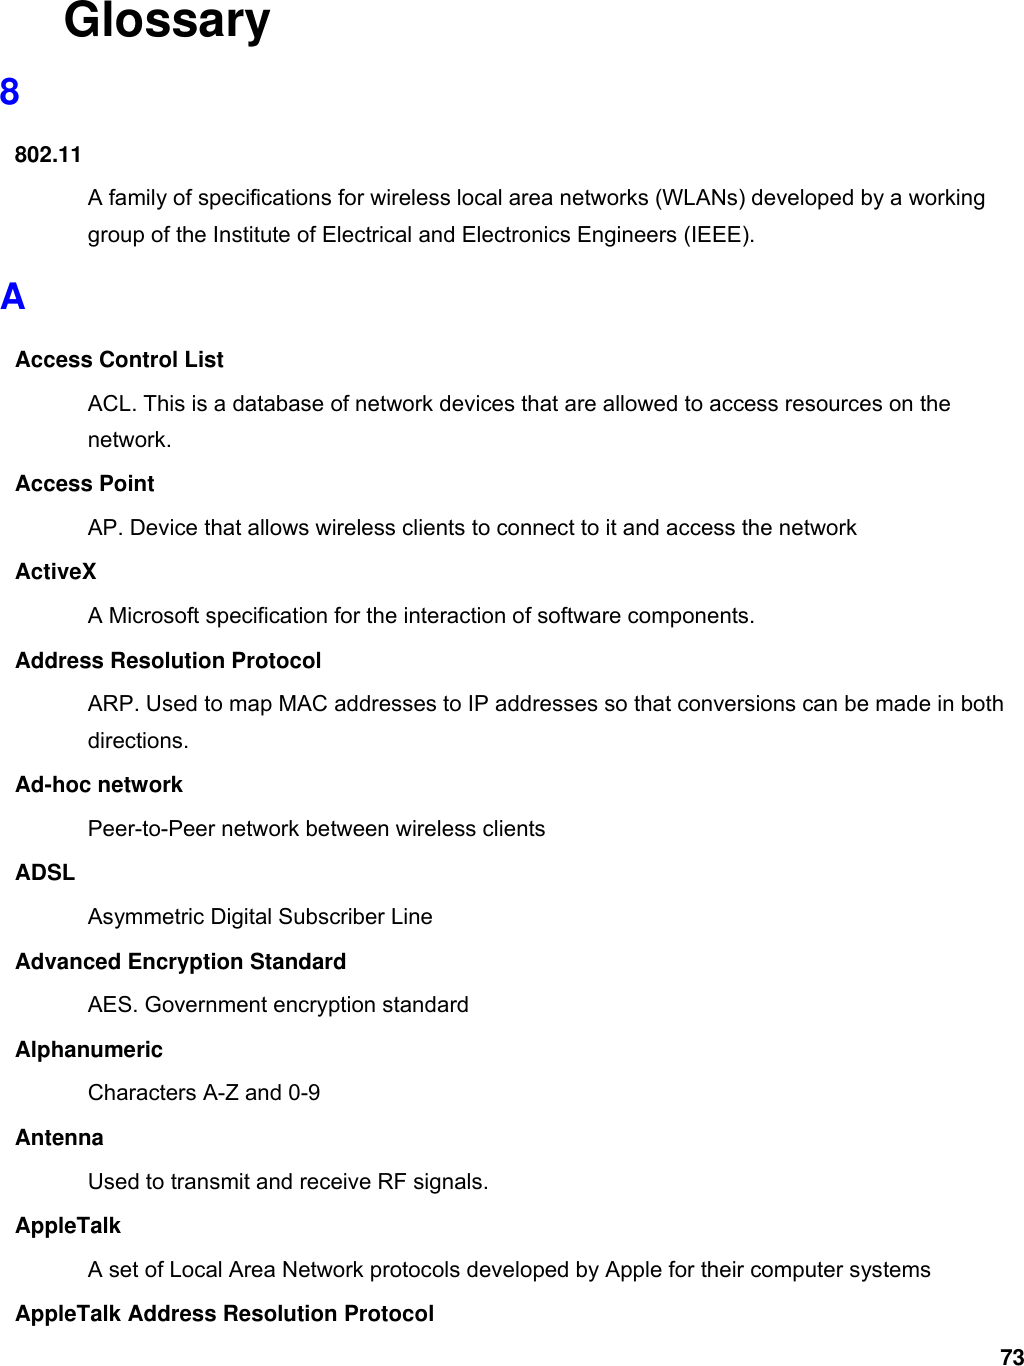 73 Glossary 8 802.11 A family of specifications for wireless local area networks (WLANs) developed by a working group of the Institute of Electrical and Electronics Engineers (IEEE).   A Access Control List ACL. This is a database of network devices that are allowed to access resources on the network. Access Point AP. Device that allows wireless clients to connect to it and access the network ActiveX A Microsoft specification for the interaction of software components.   Address Resolution Protocol ARP. Used to map MAC addresses to IP addresses so that conversions can be made in both directions. Ad-hoc network Peer-to-Peer network between wireless clients ADSL Asymmetric Digital Subscriber Line Advanced Encryption Standard AES. Government encryption standard Alphanumeric Characters A-Z and 0-9 Antenna Used to transmit and receive RF signals. AppleTalk A set of Local Area Network protocols developed by Apple for their computer systems AppleTalk Address Resolution Protocol 